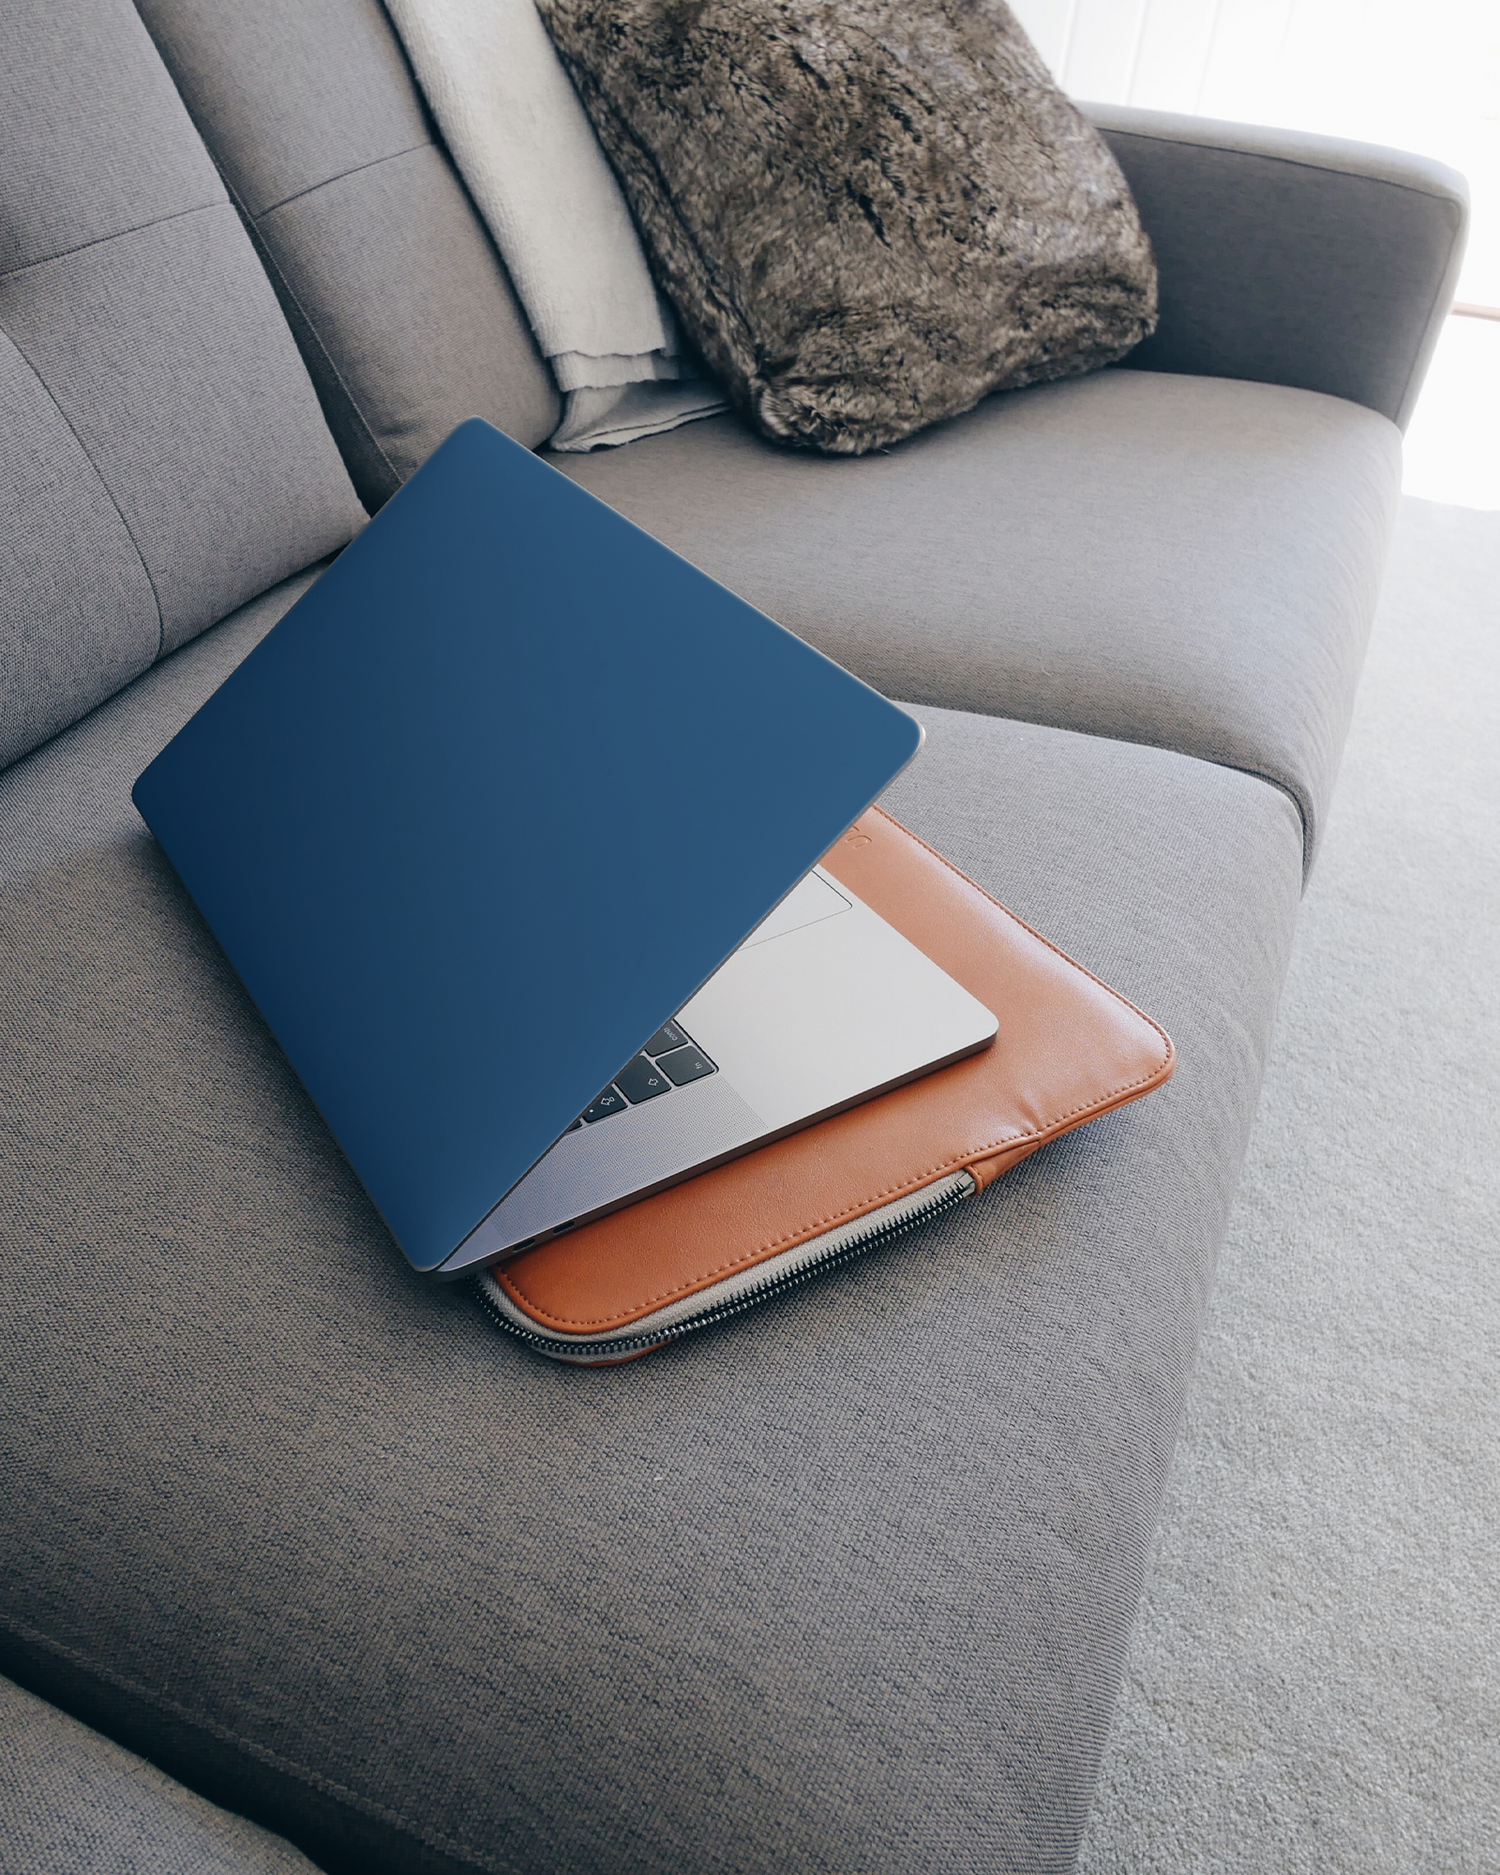 CLASSIC BLUE Laptop Skin for 15 inch Apple MacBooks on a couch